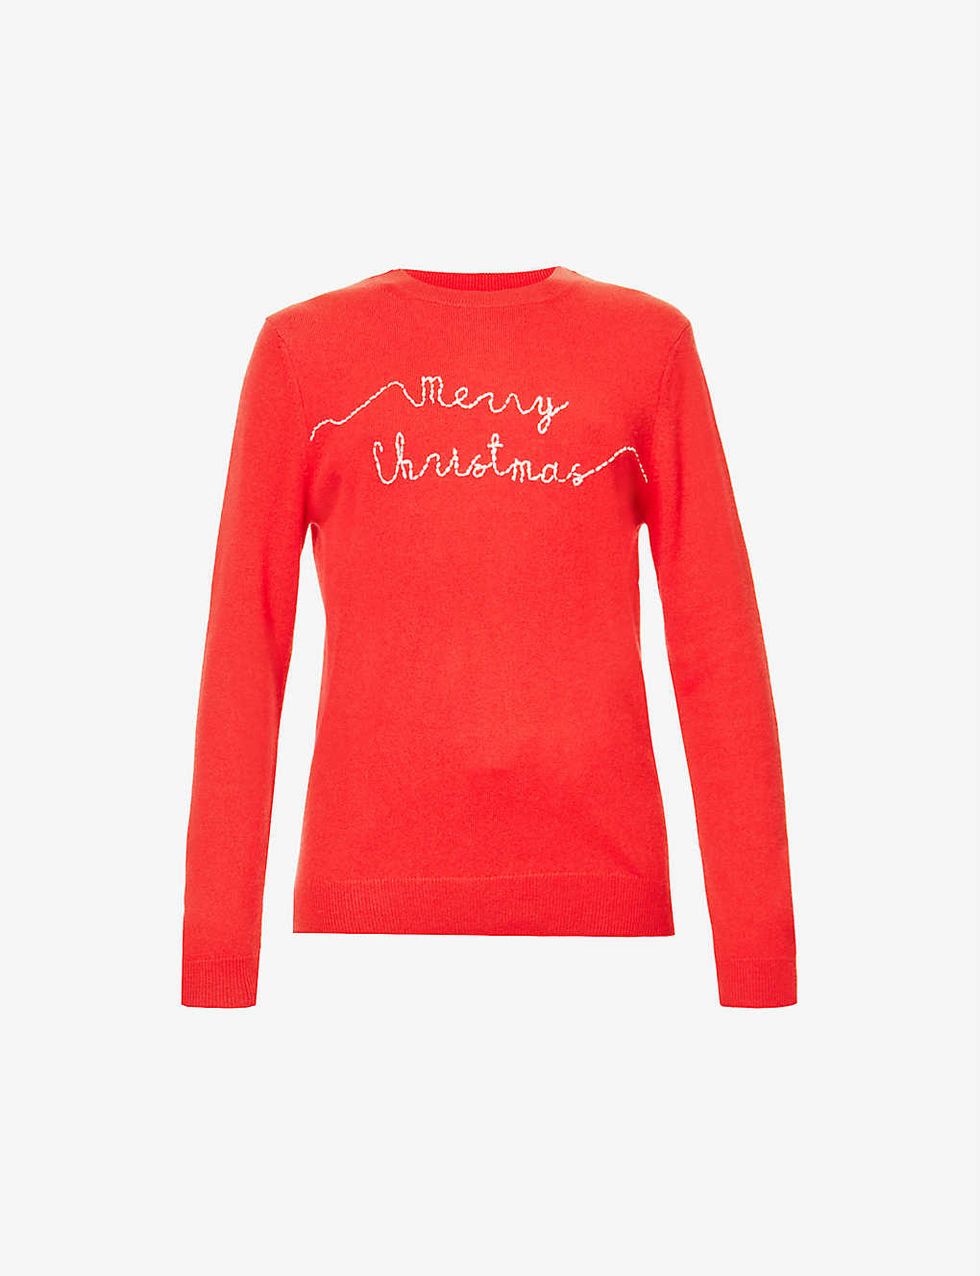 Merry Christmas wool and cashmere-blend jumper